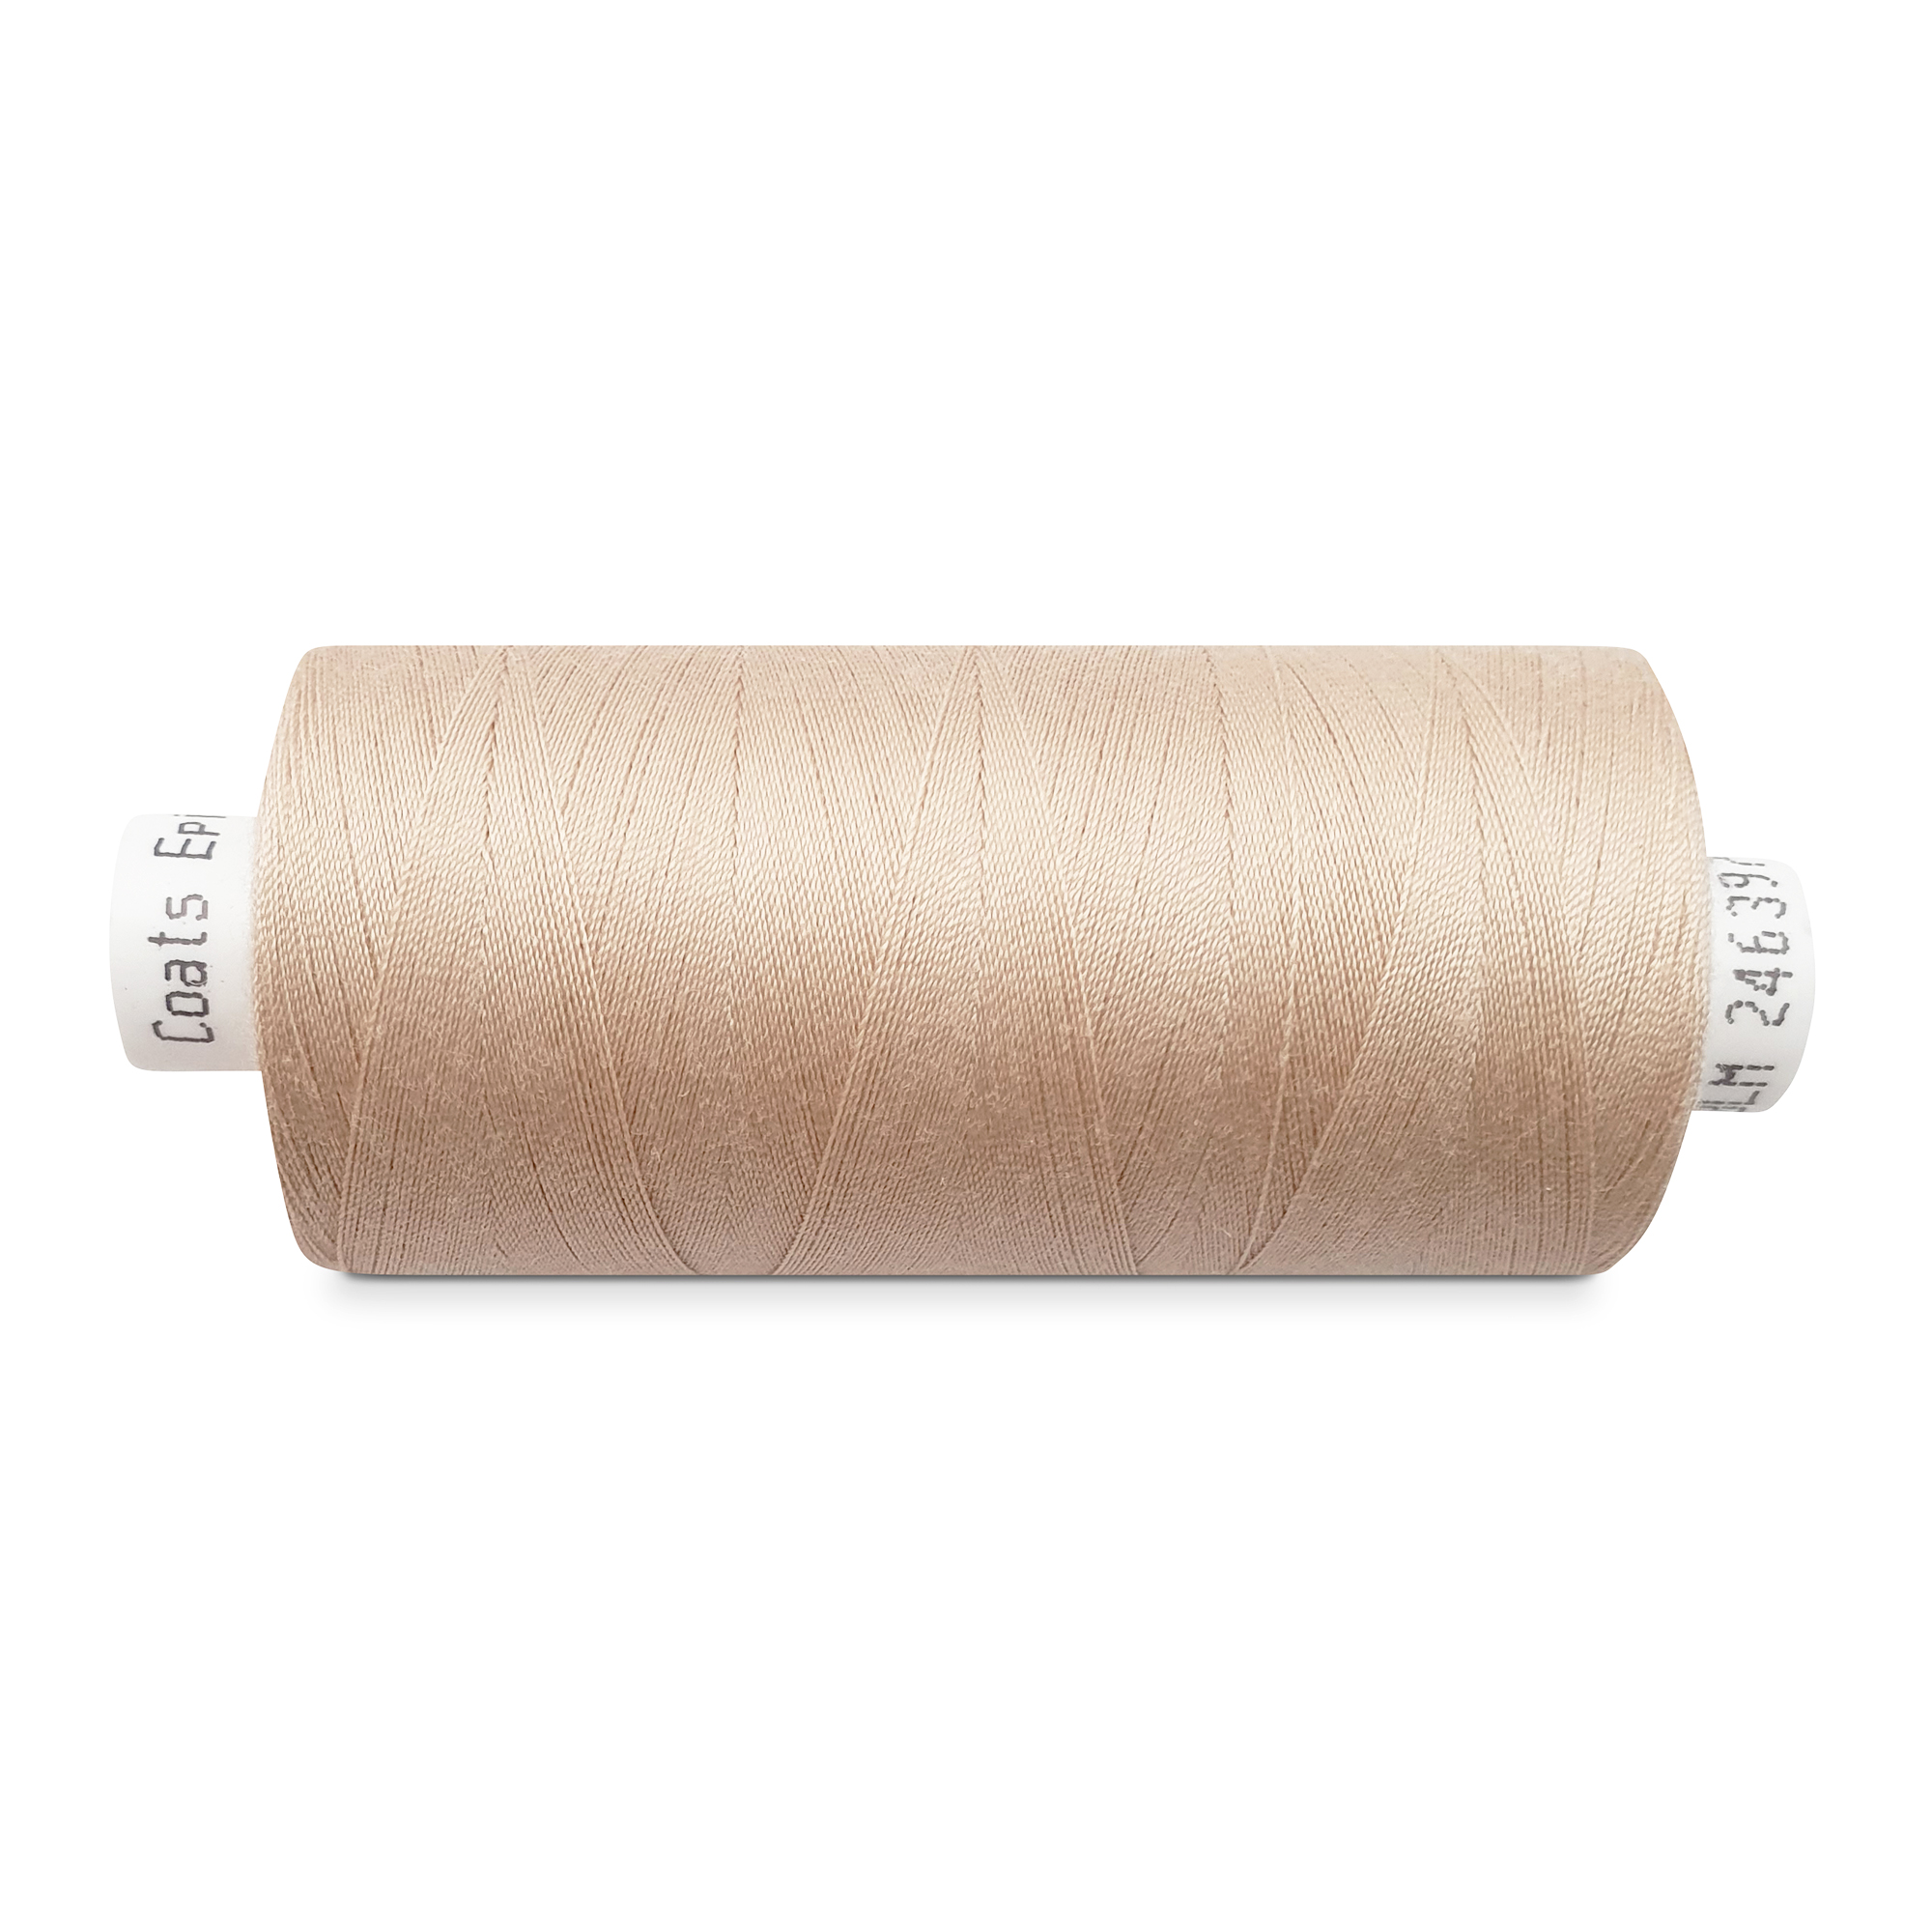 Jeans/Sewing thread cherrywood